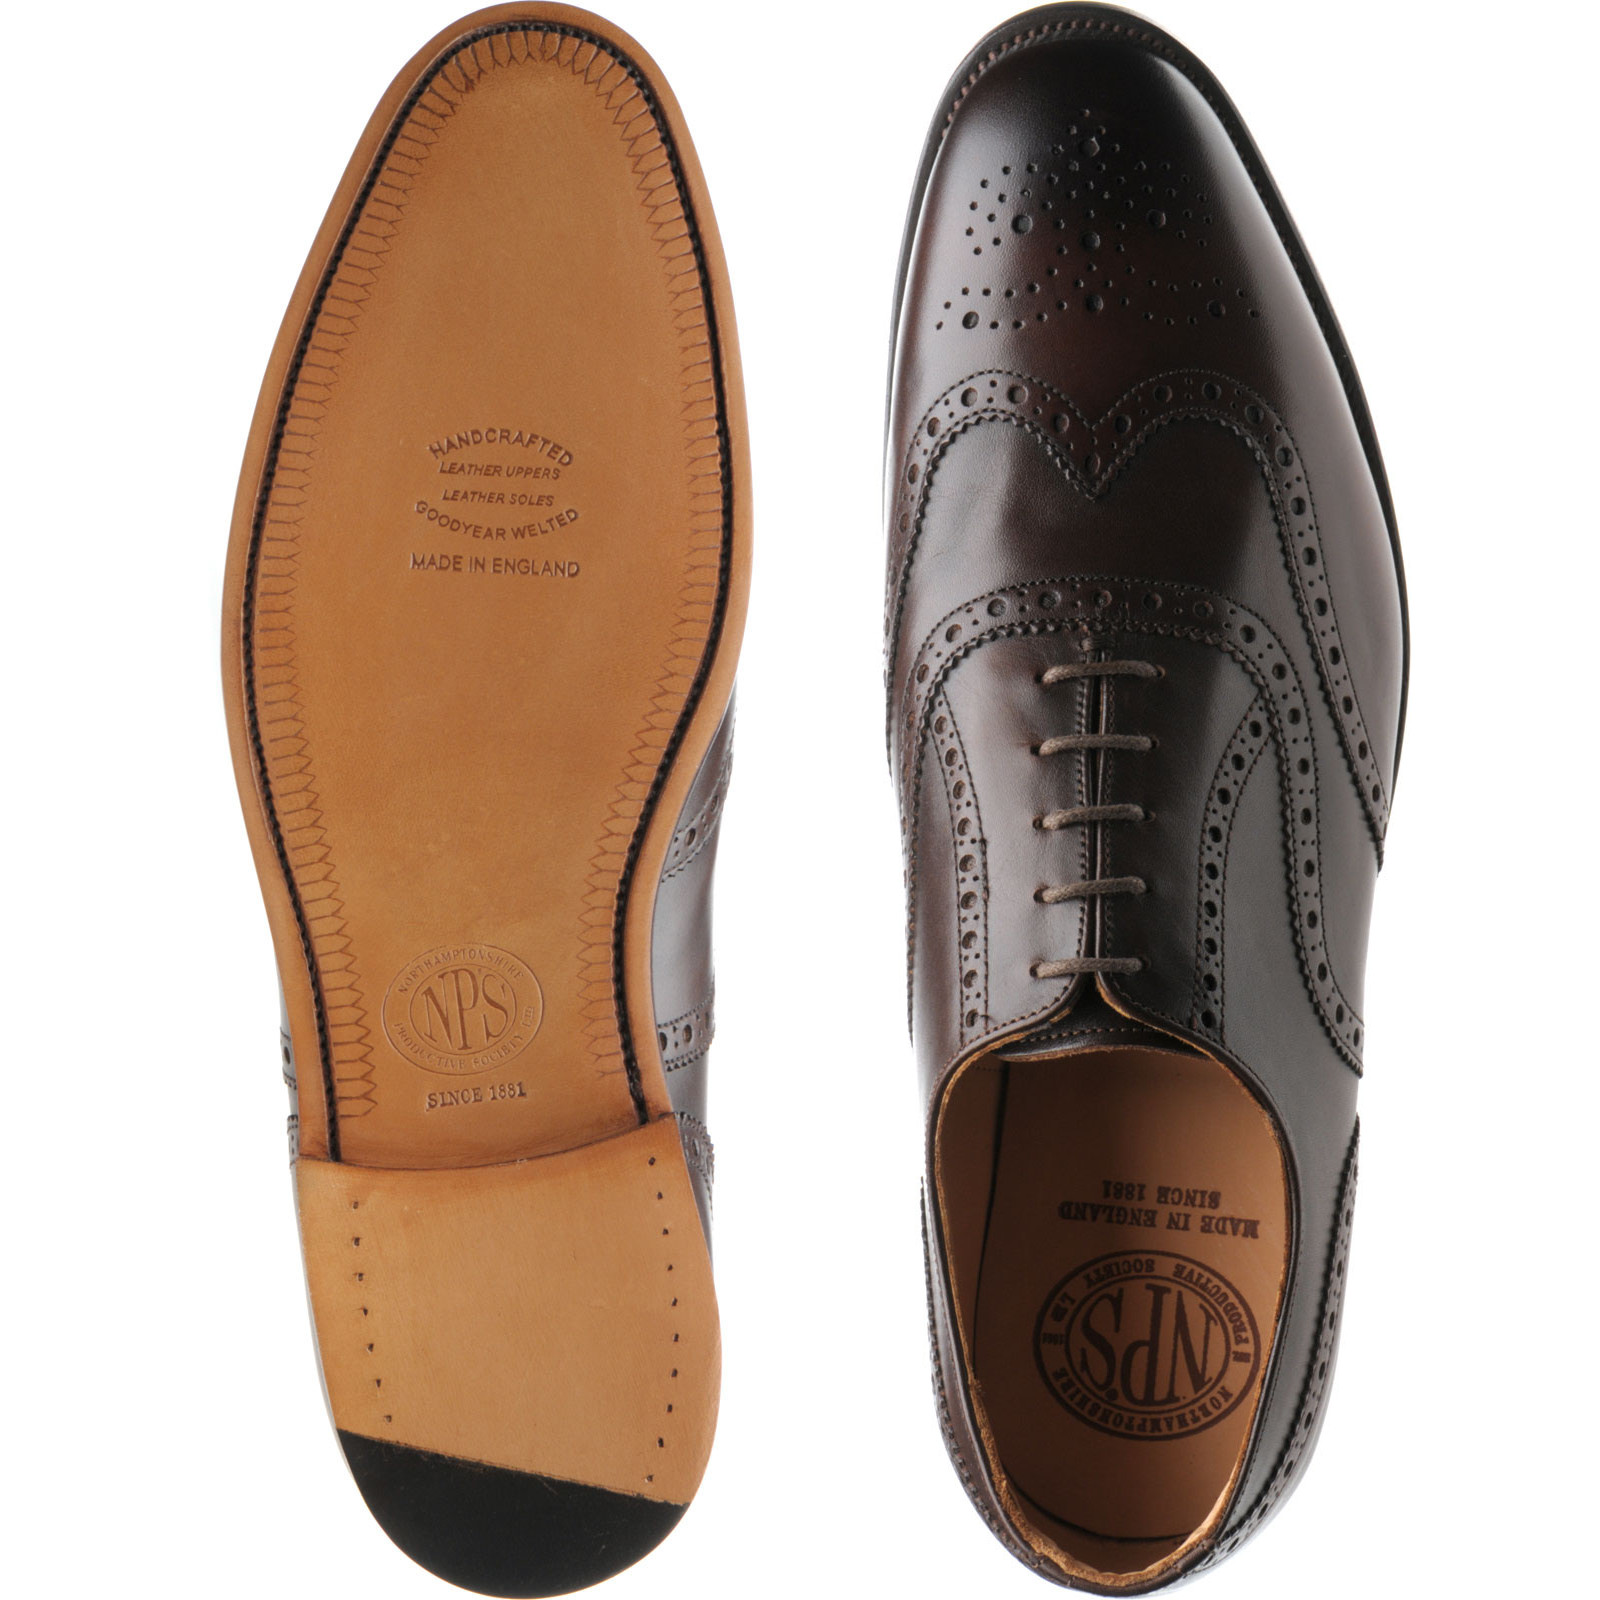 NPS shoes | NPS Sale | Churchill brogues in Walnut Calf at Herring Shoes